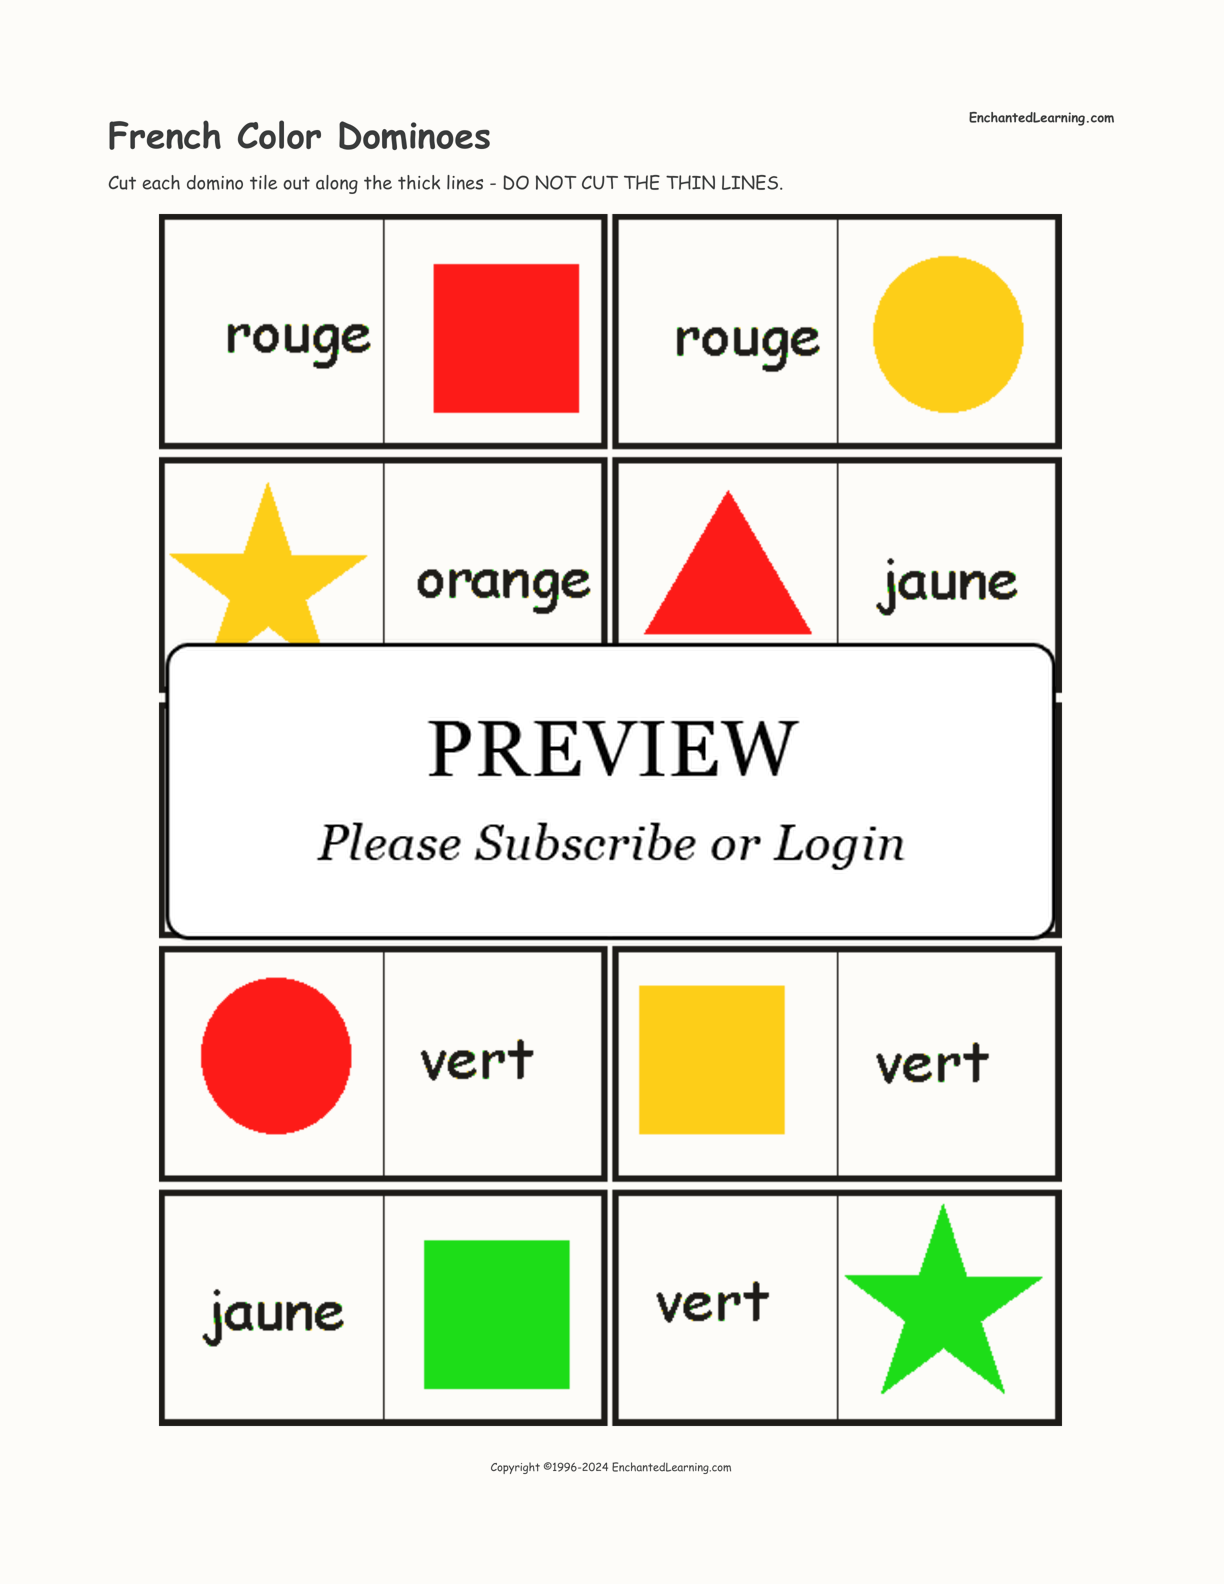 French Color Dominoes interactive printout page 1